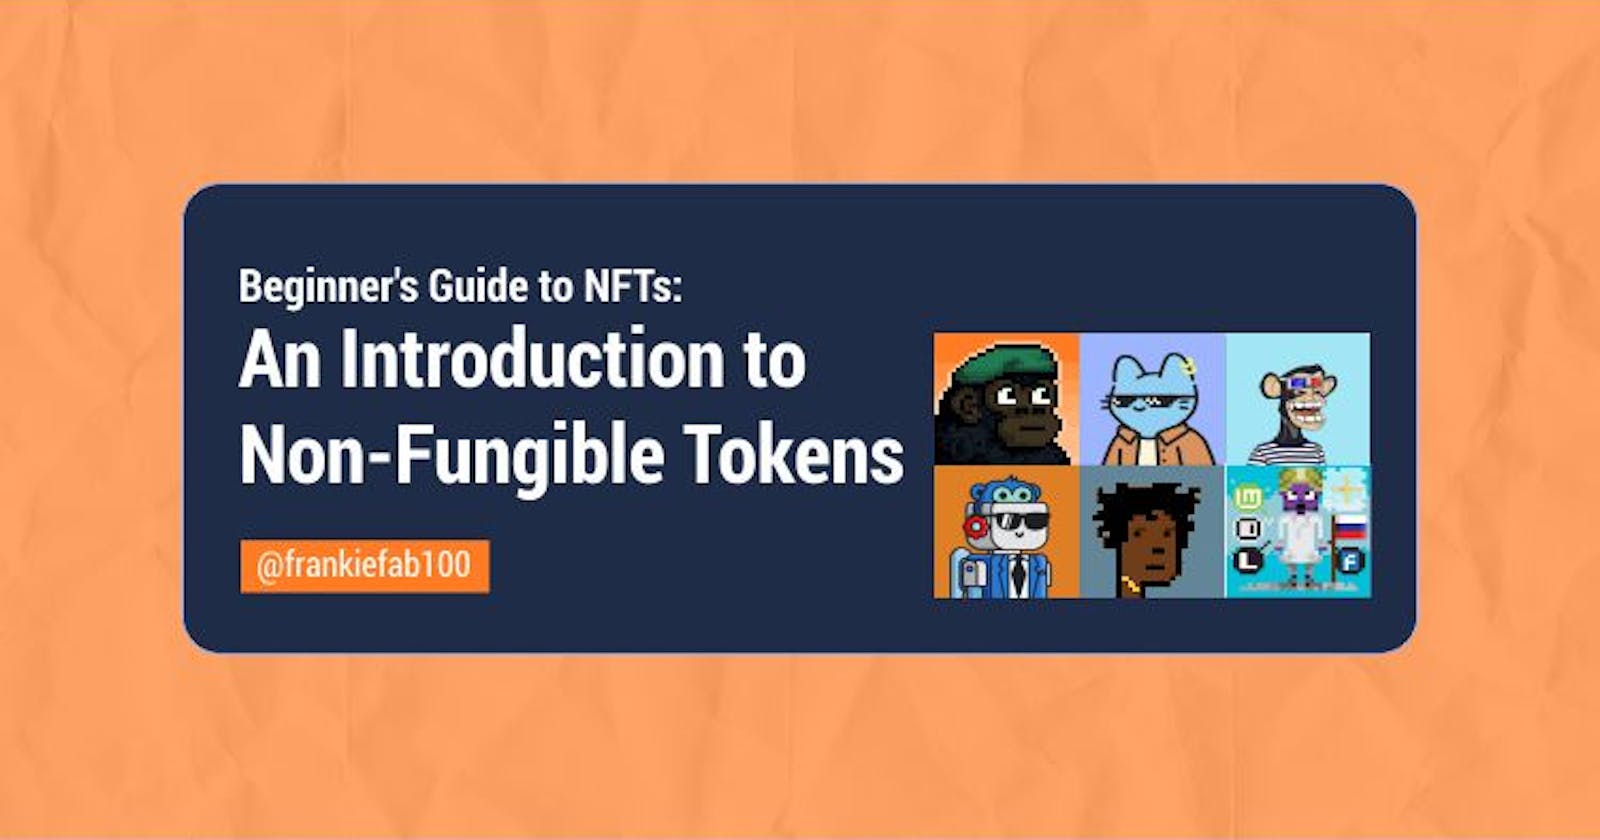 Beginner's Guide to NFTs: An Introduction to Non-Fungible Tokens